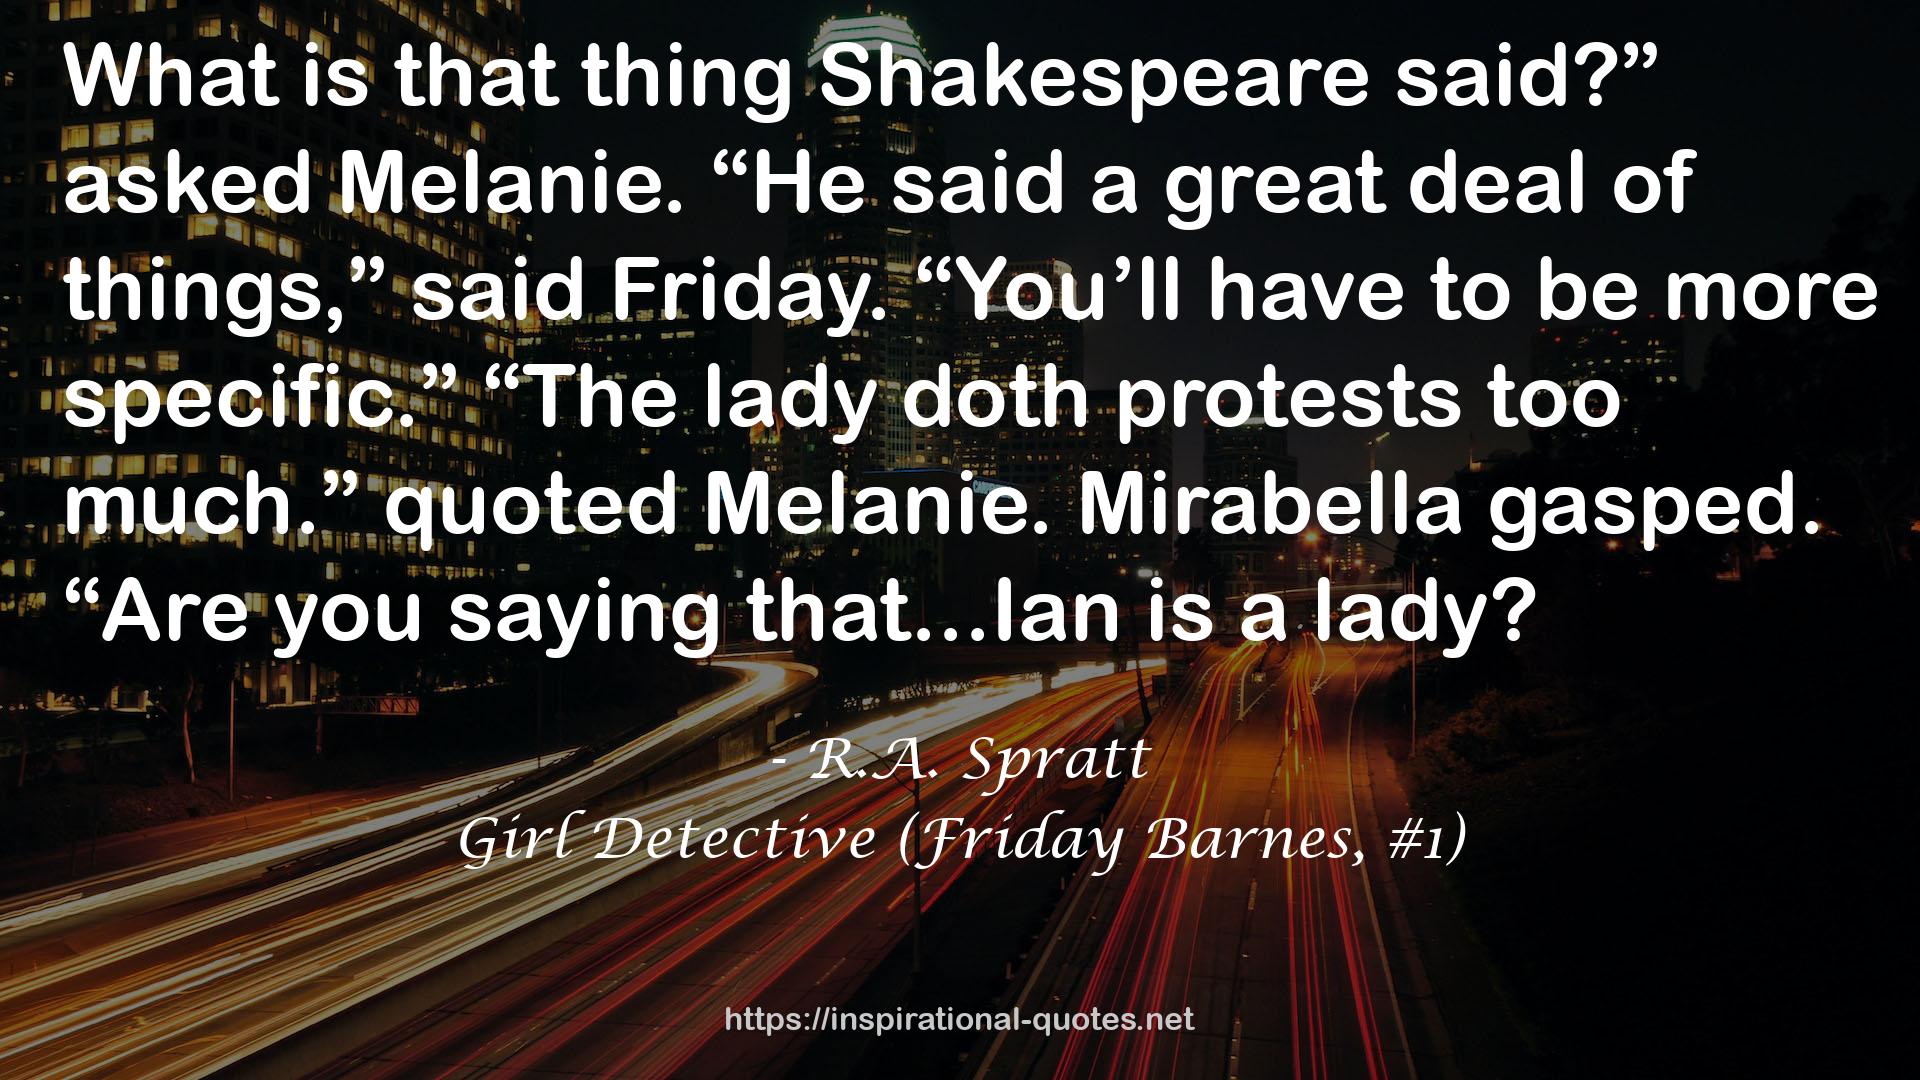 Girl Detective (Friday Barnes, #1) QUOTES